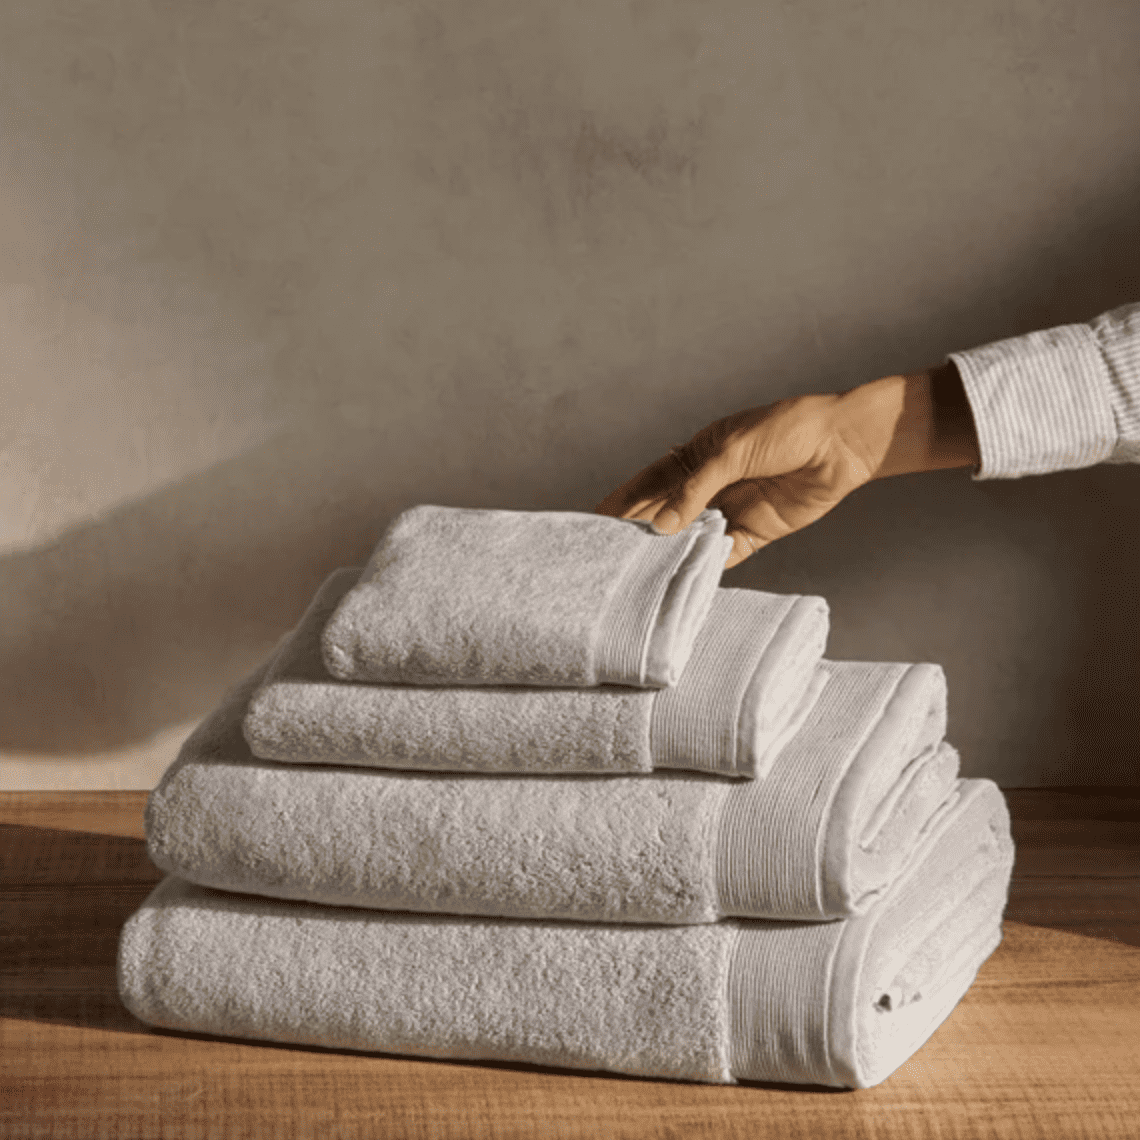 https://cdn.apartmenttherapy.info/image/upload/v1702327896/commerce/Onsen-Wovey-Plush-Towels-Lifestyle.png